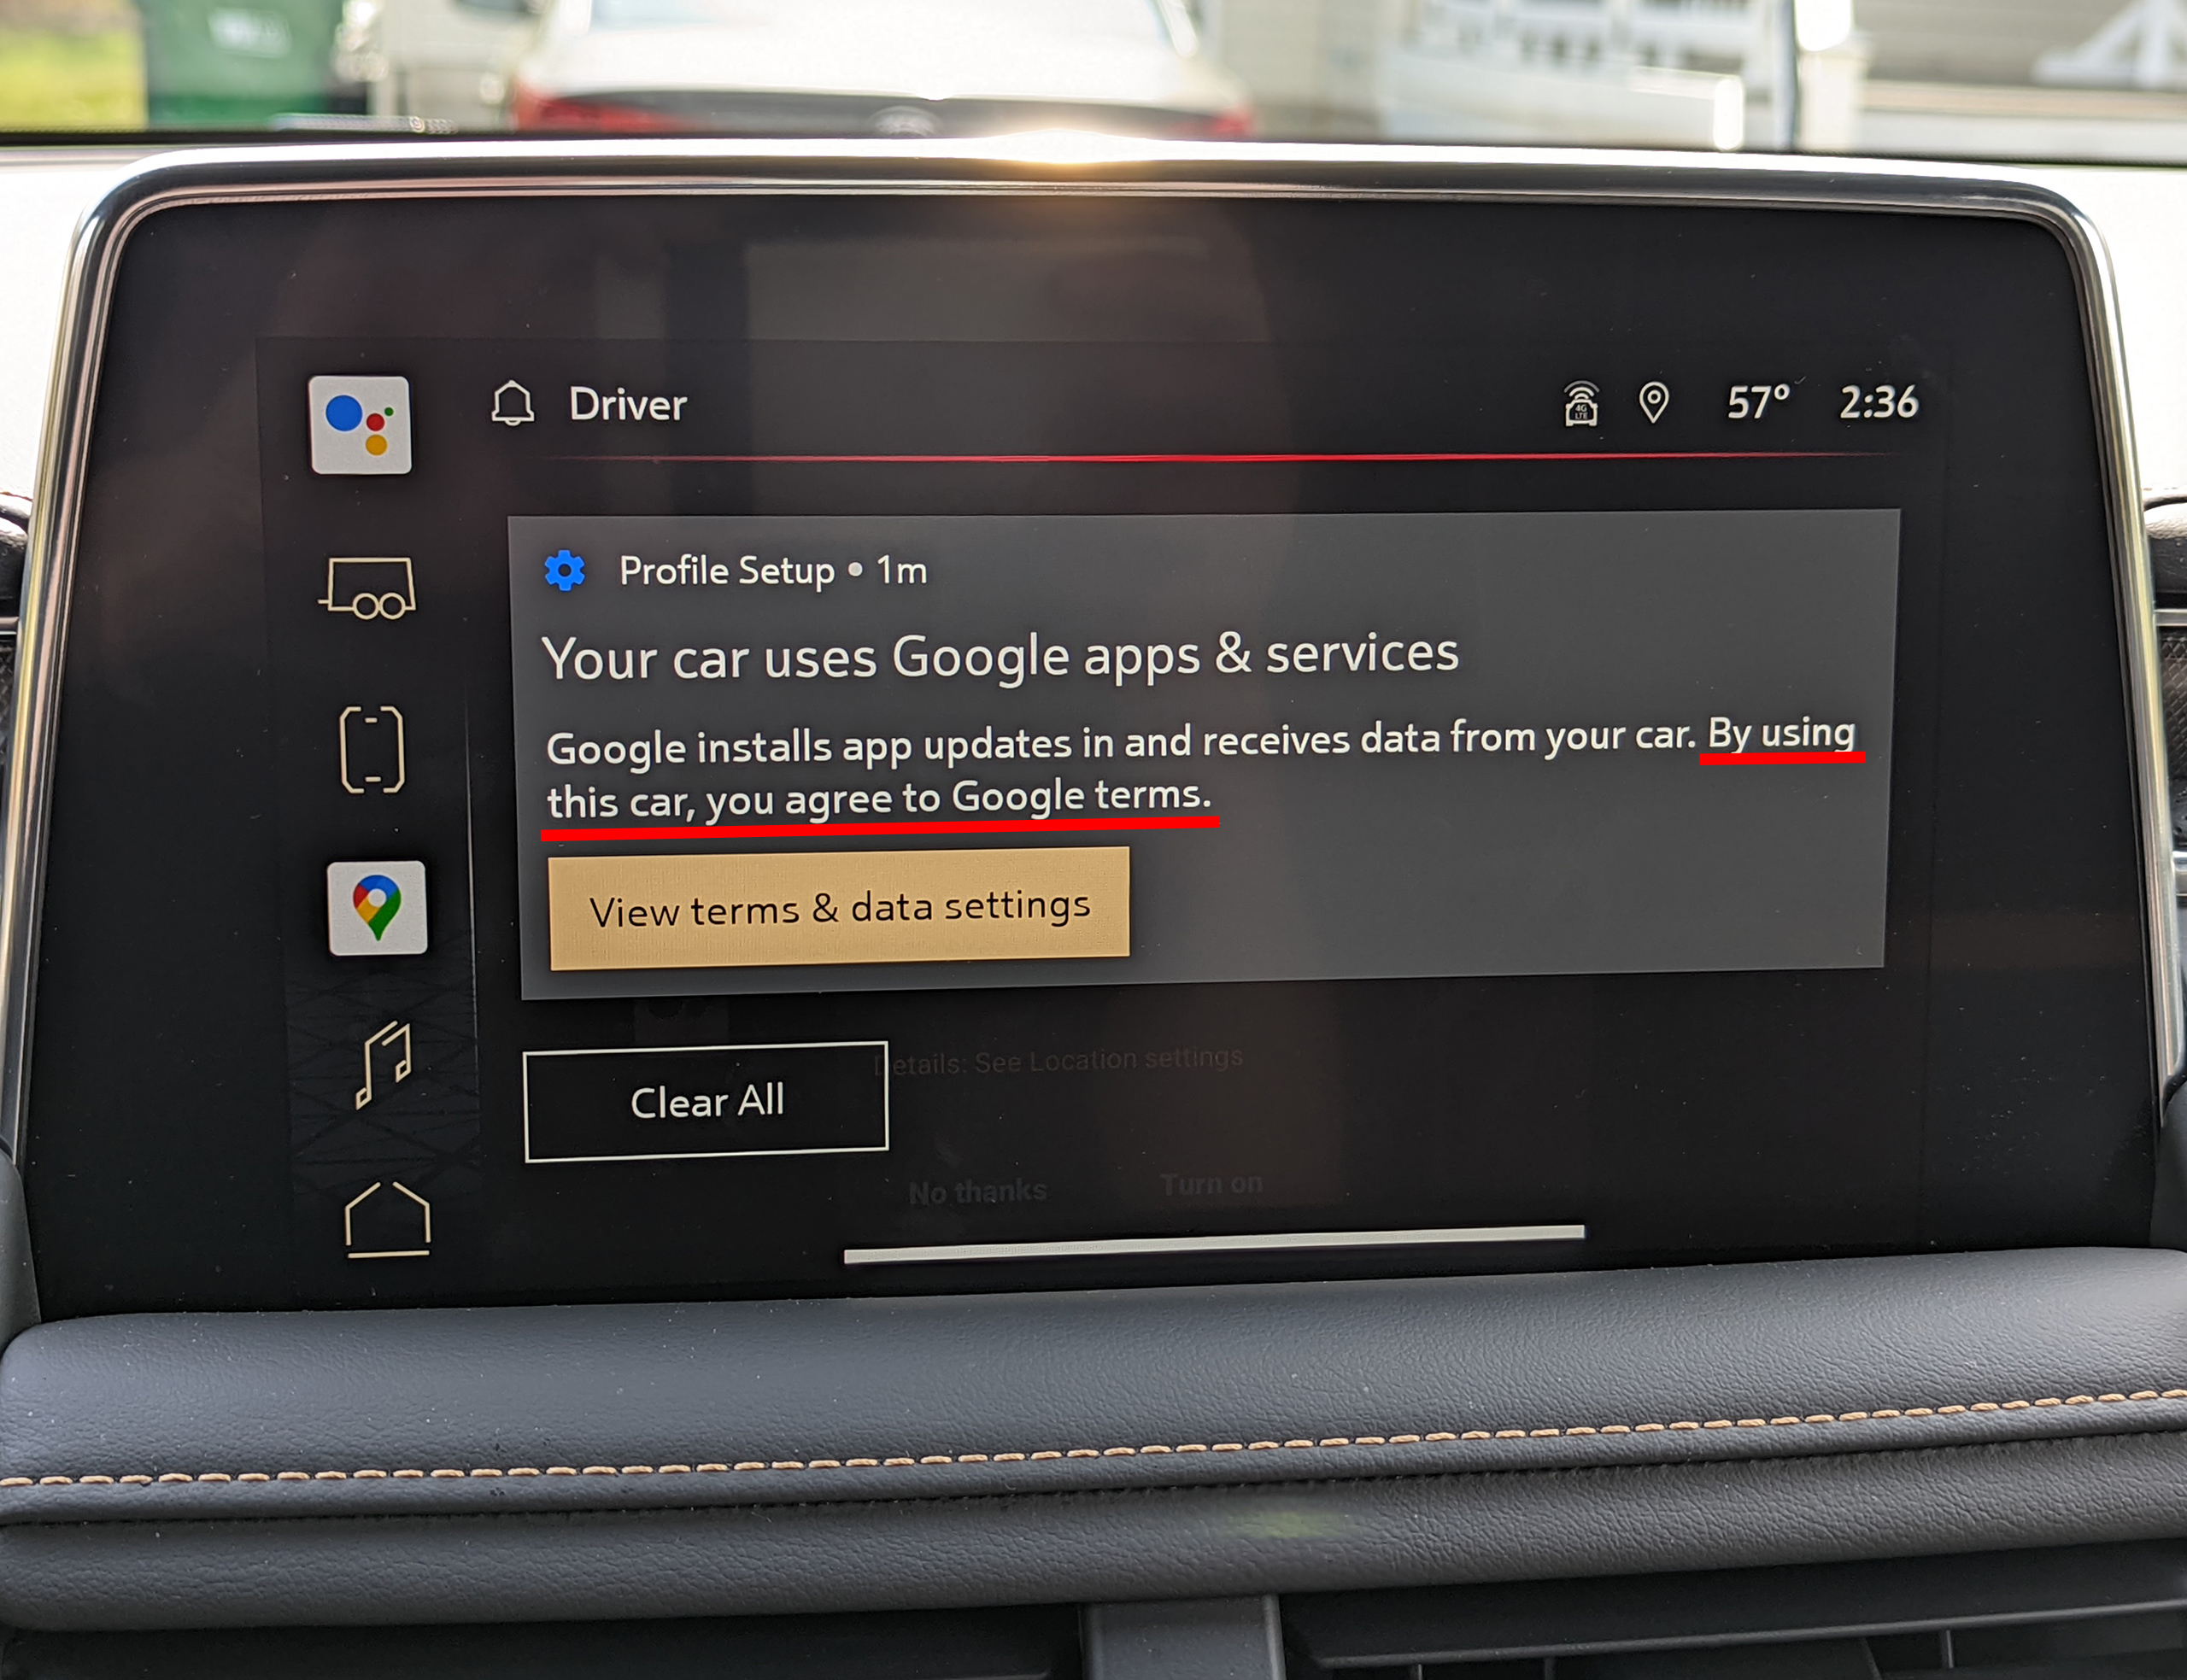 New features for Android Auto and cars with Google built-in